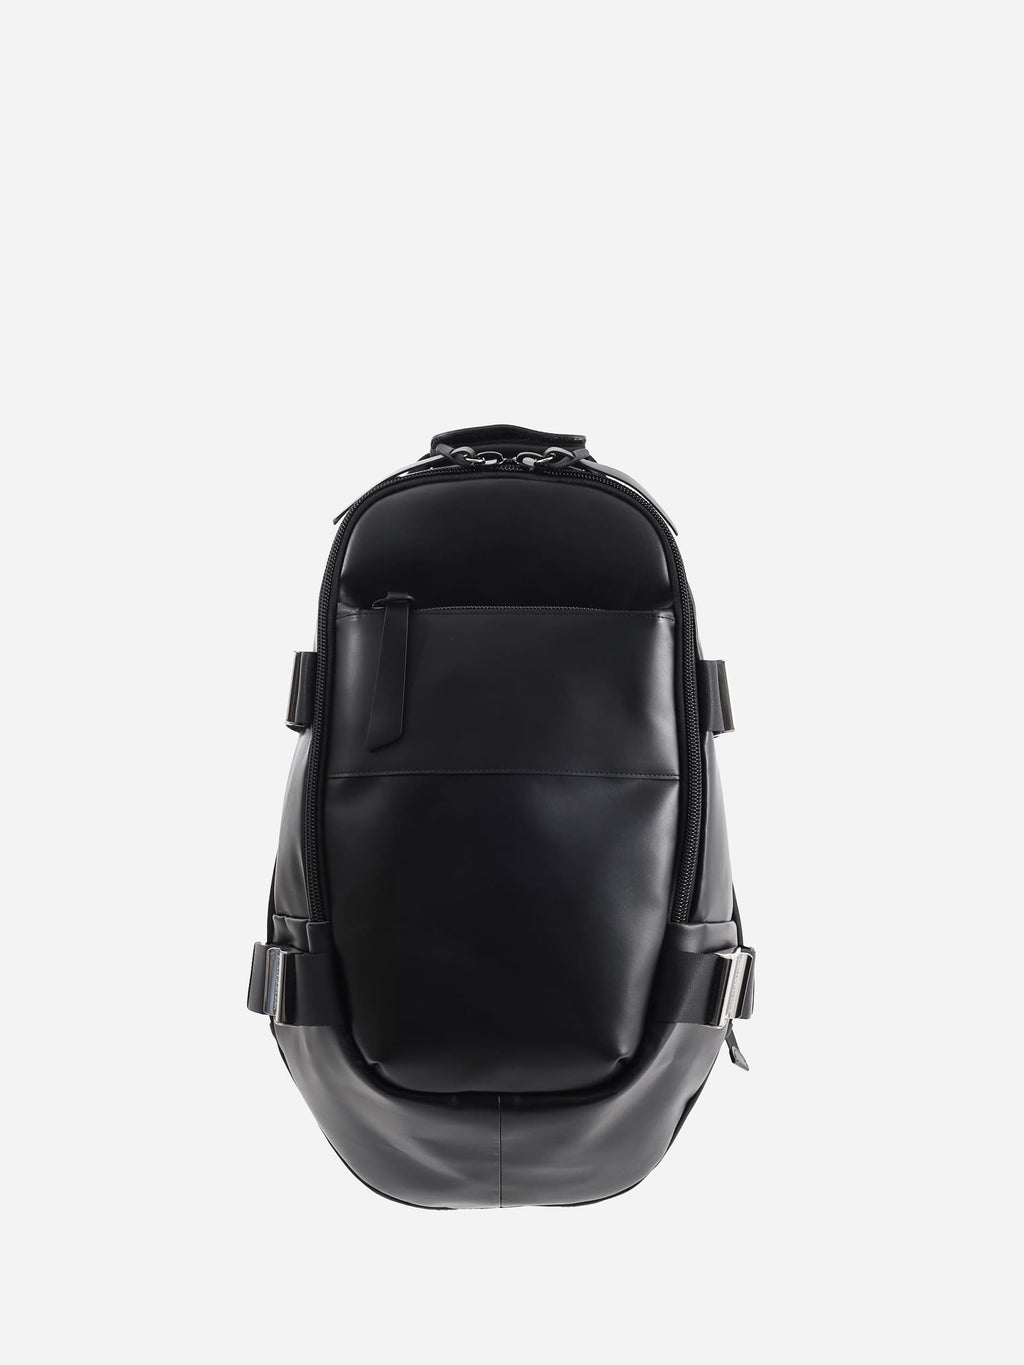 PACK-2 leatherbackpack (for 16inch pc) 洋服好きにお薦めな ...